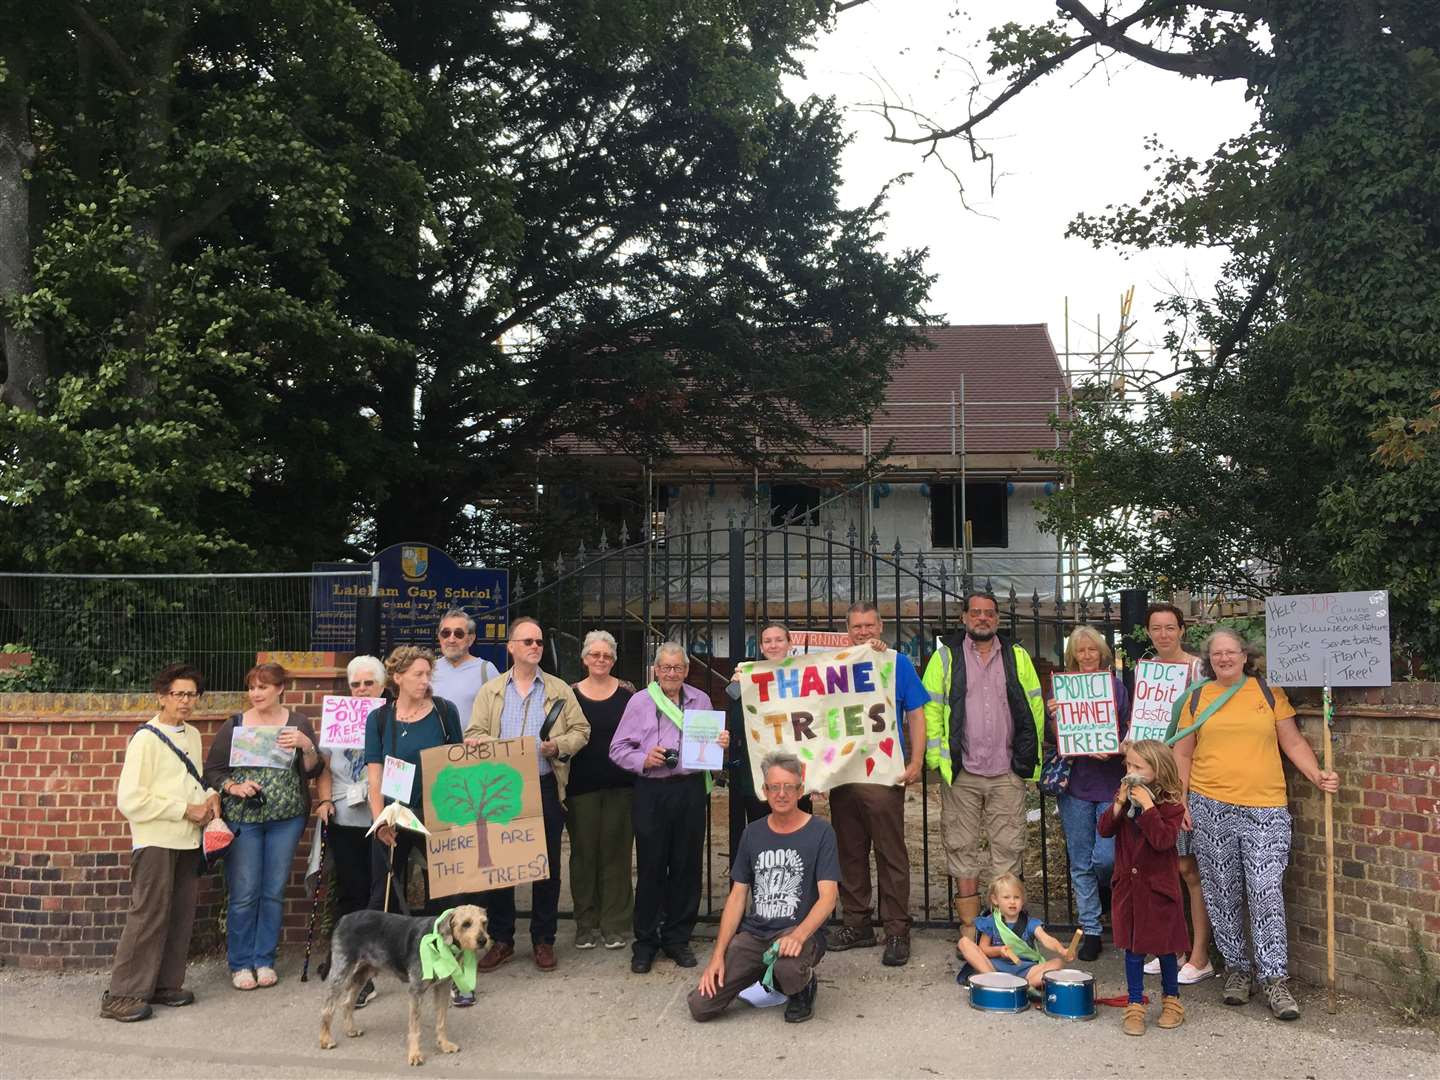 Protesters at the former Laleham Gap school in Cliftonville campaign against developers chopping down trees claiming they are damaging wildlife. Picture: Thanet Trees (14964251)